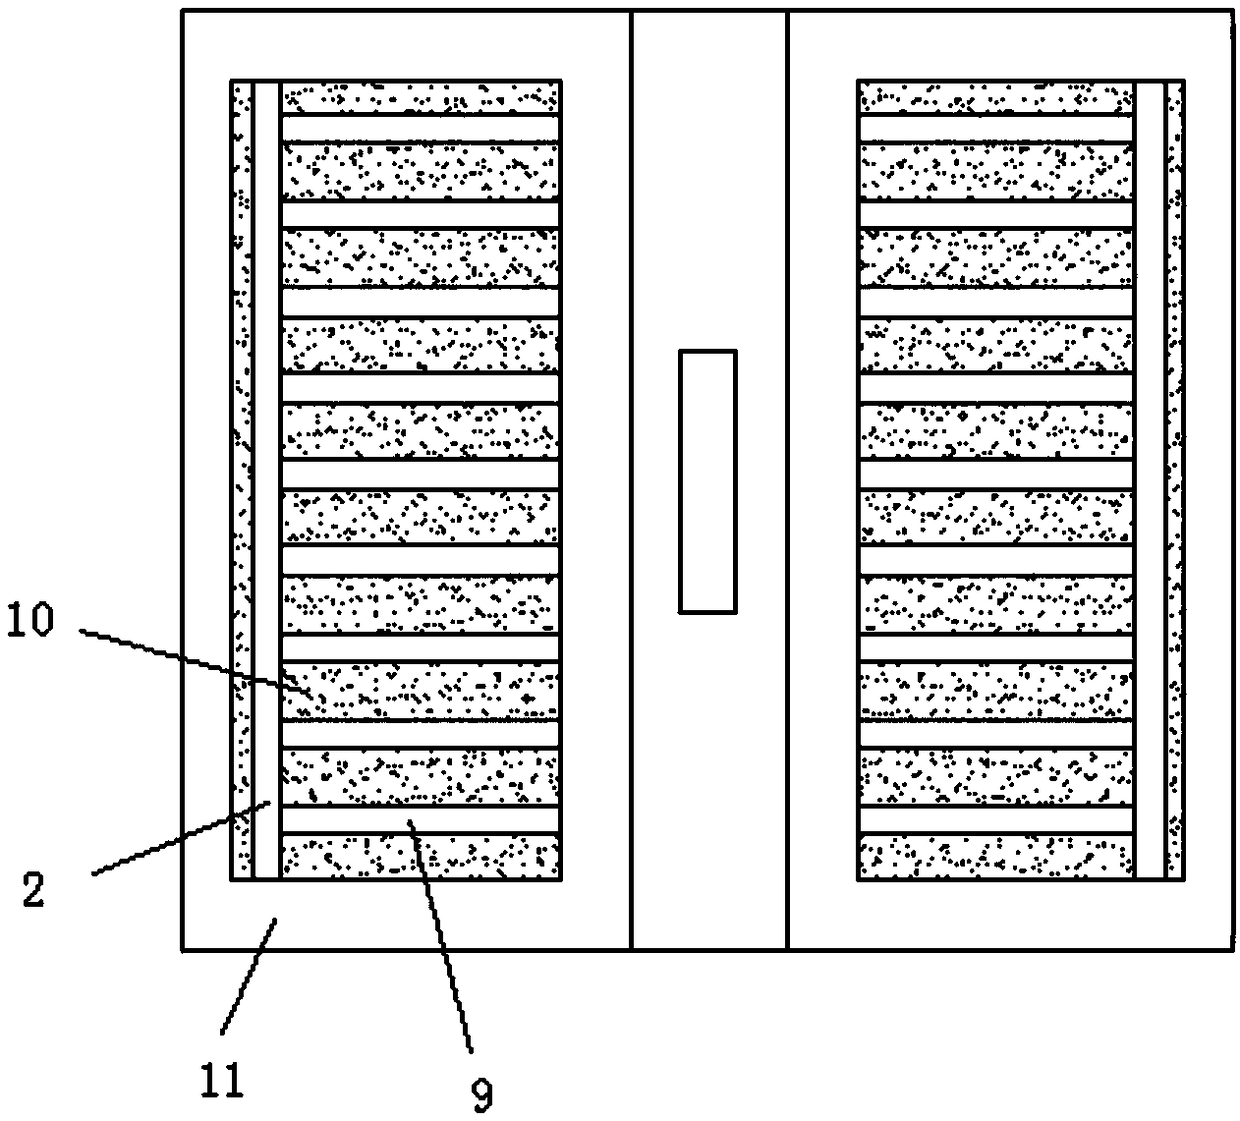 Storage device for medical device